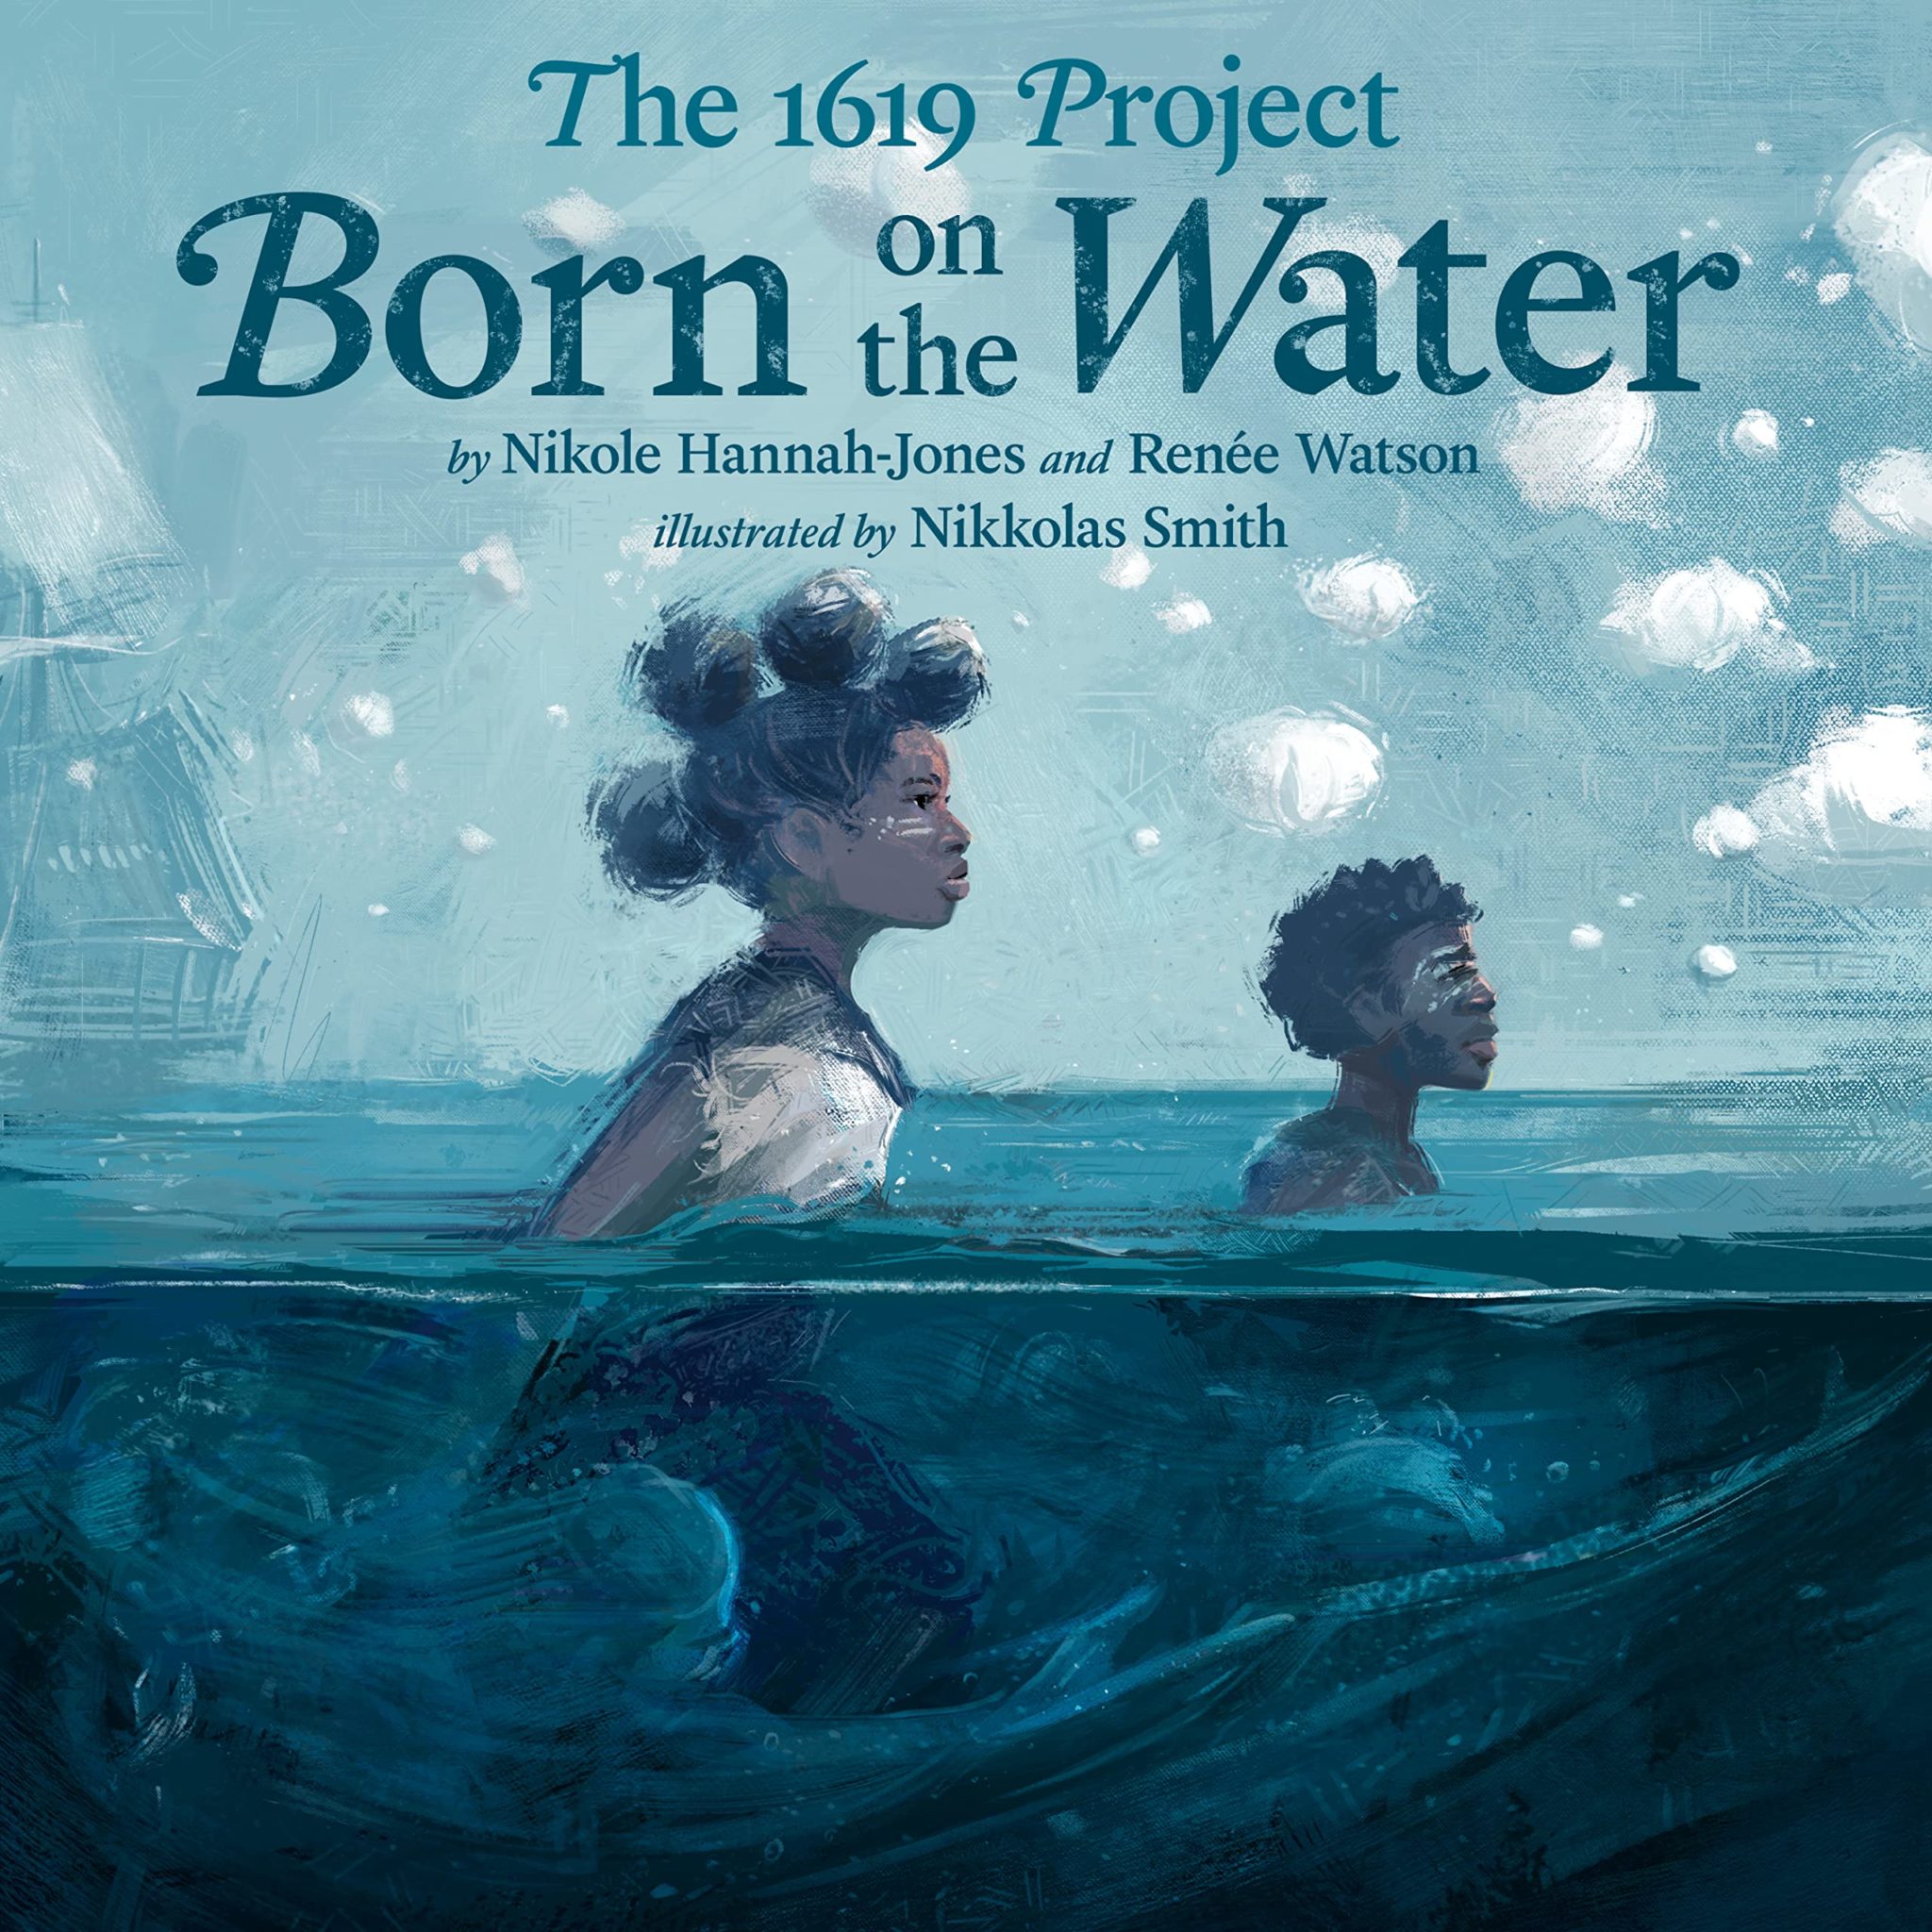 Cover of Born on the Water, featuring an illustration of a Black woman and man treading water. Behind them a ship looms in the distance.